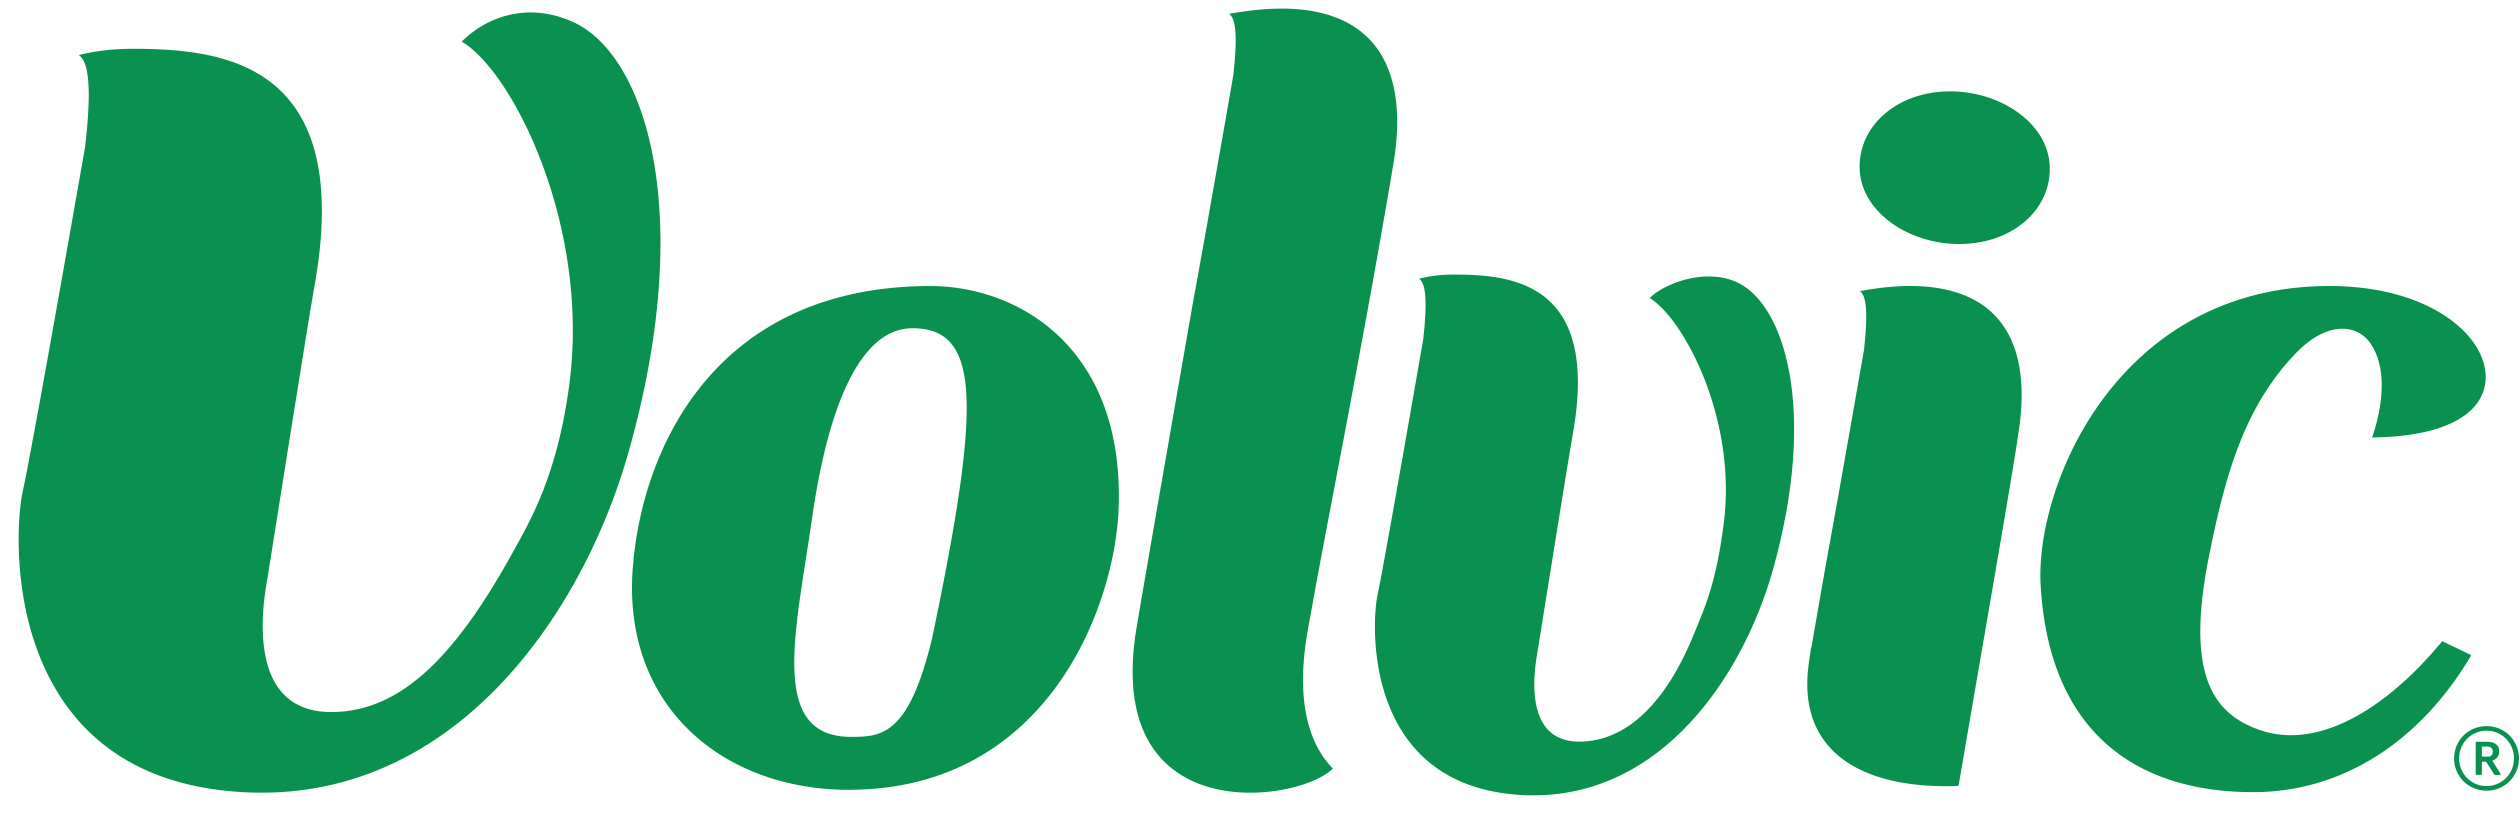 Volvic, a very special natural mineral water – PETplanet